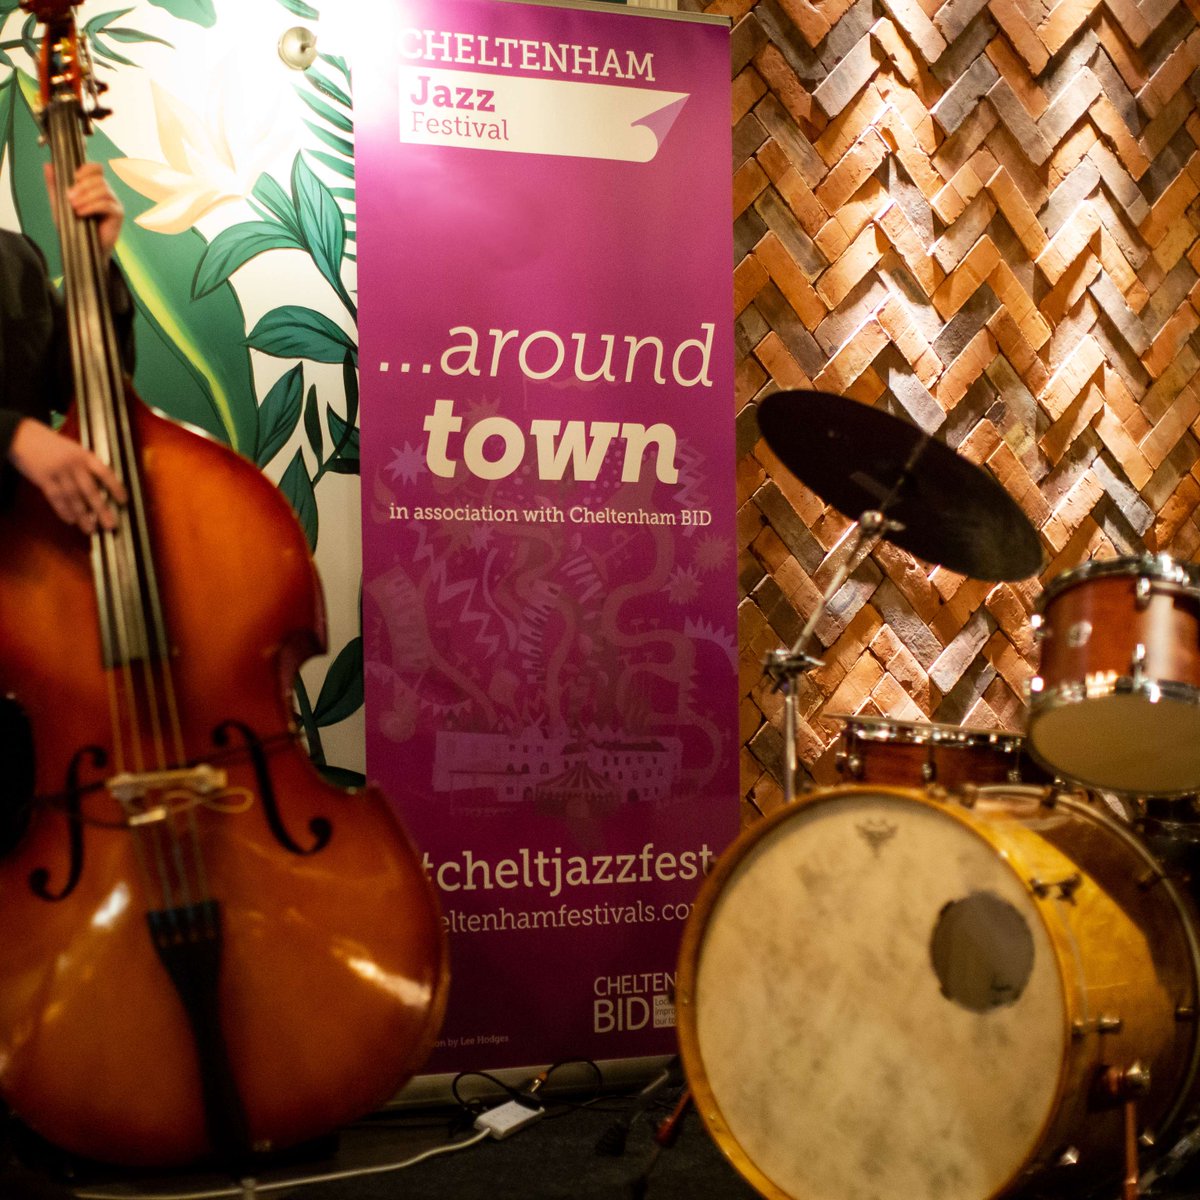 Calling all Cheltenham venues! 🎷 Be part of Cheltenham Jazz Festival's ...around town free programme from May 1-6 2024! 🎵 Ready to amplify the jazz vibes? Click the link below to apply! 👇 ow.ly/4iqV50Qgugs #CheltJazzFest #AroundTownVenues #JazzUpYourVenue